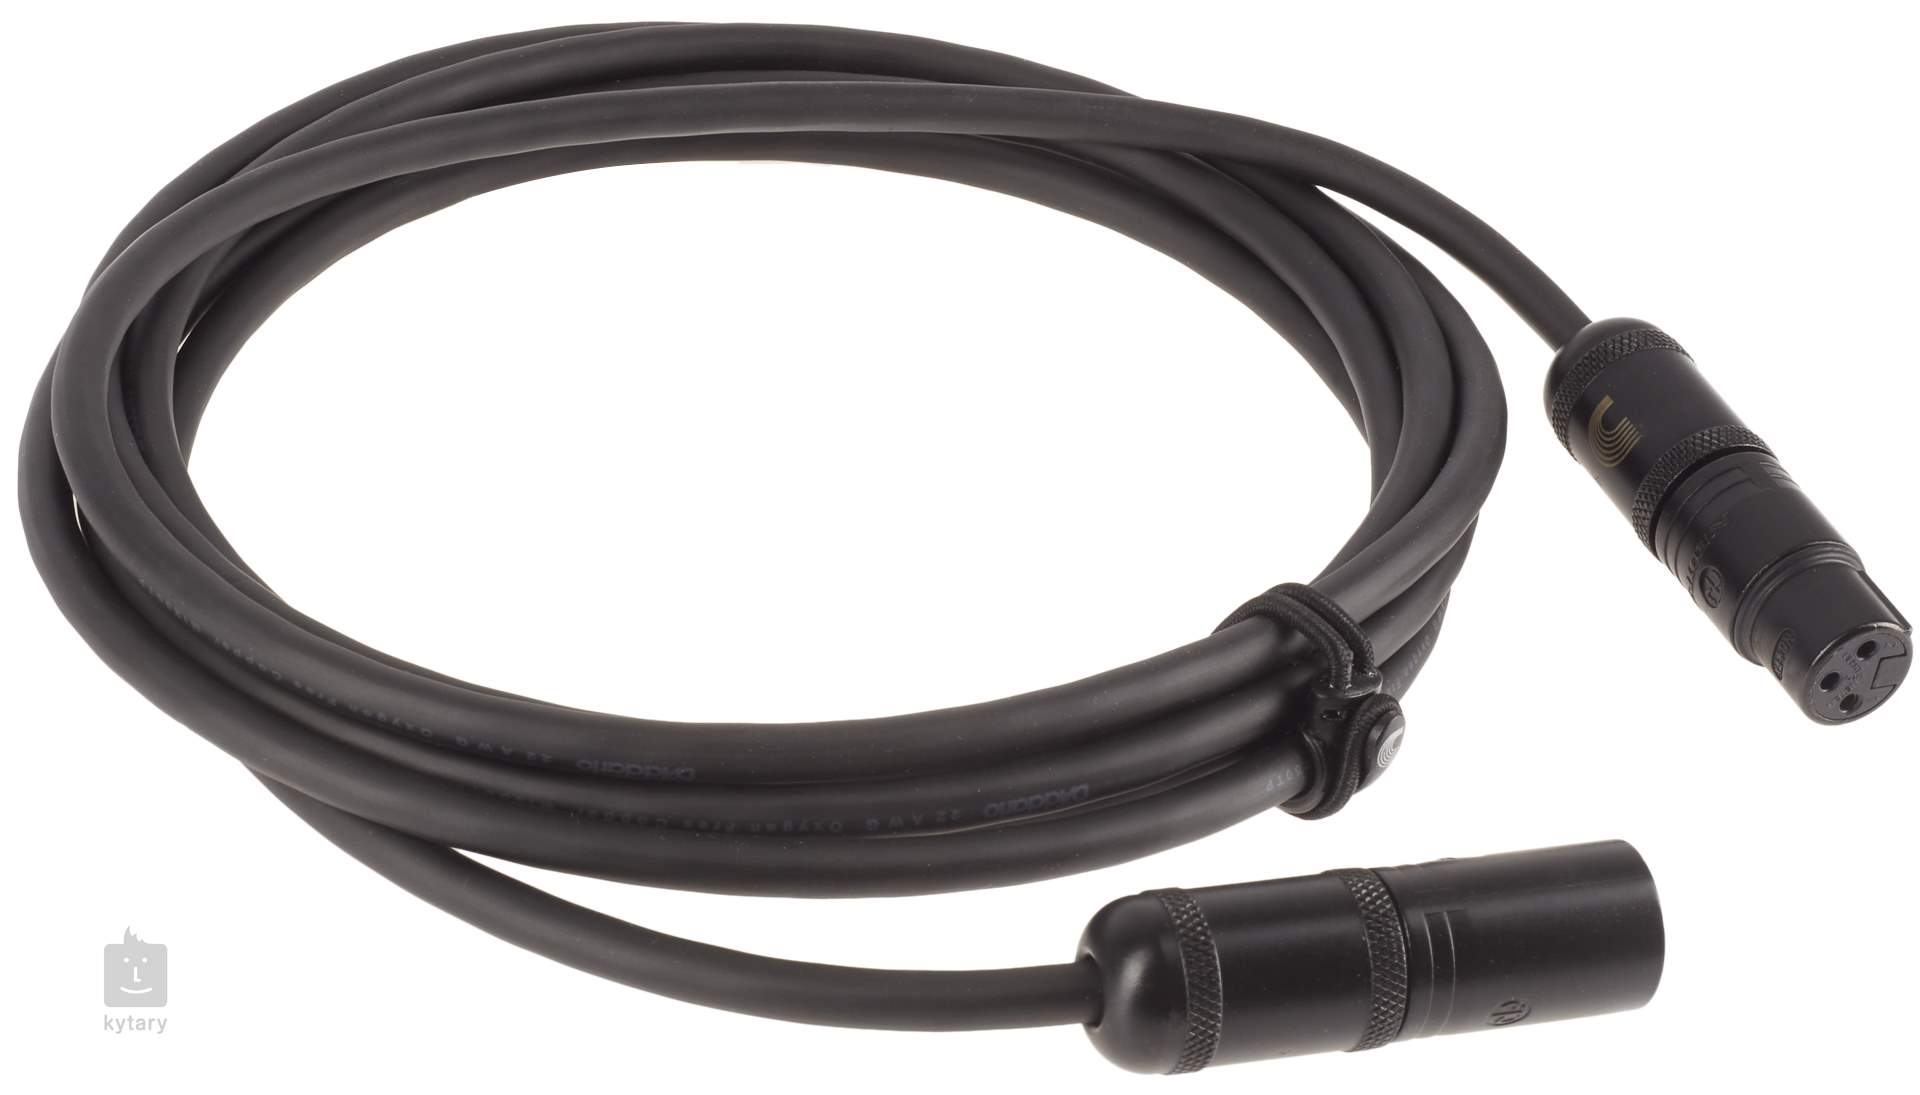 American Stage XLR Microphone/Powered Speaker Cable, PW-AMSM-10